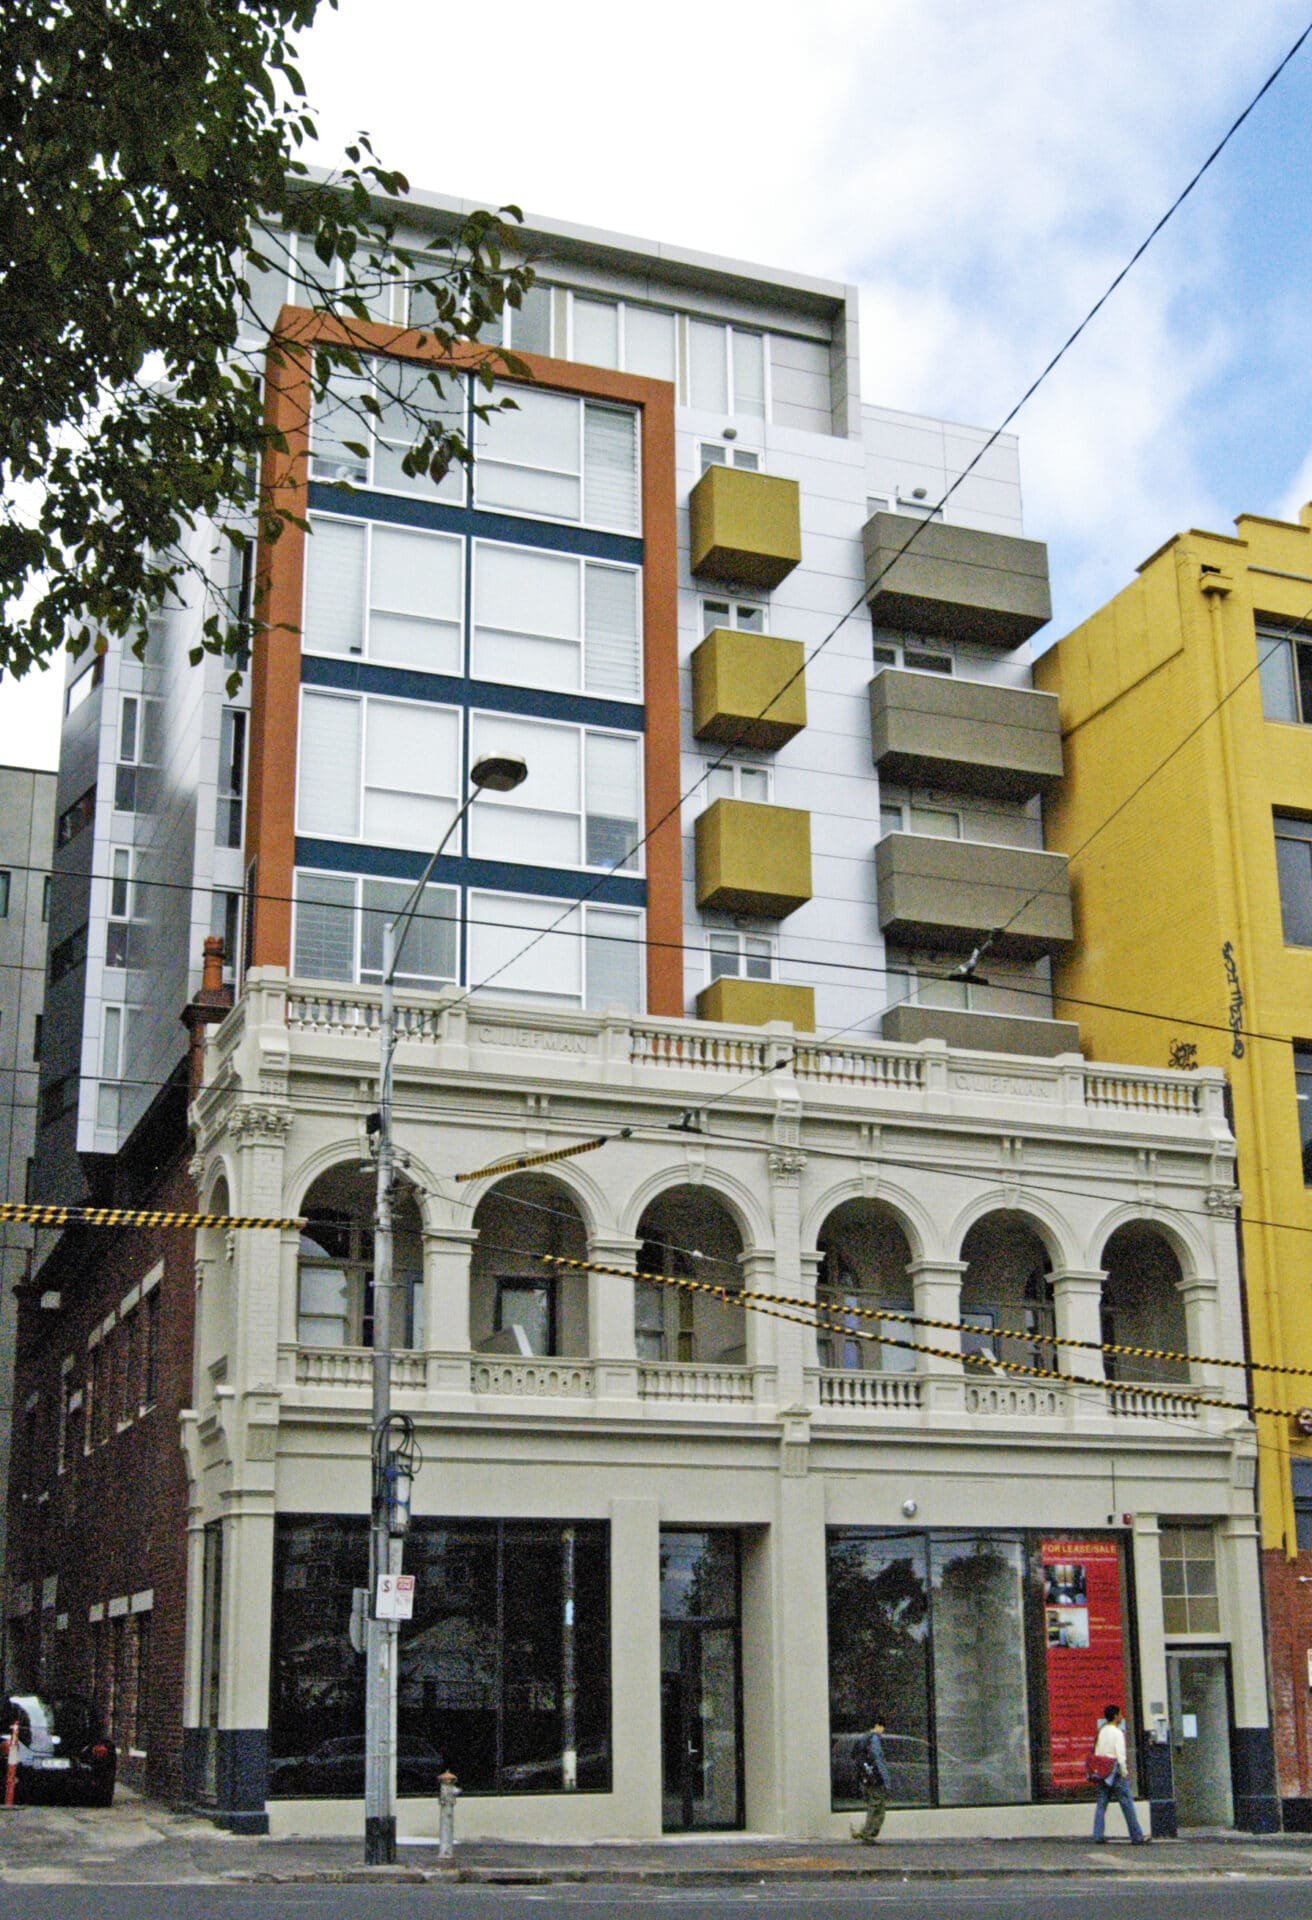 02329 Swanston St 03A - Projects